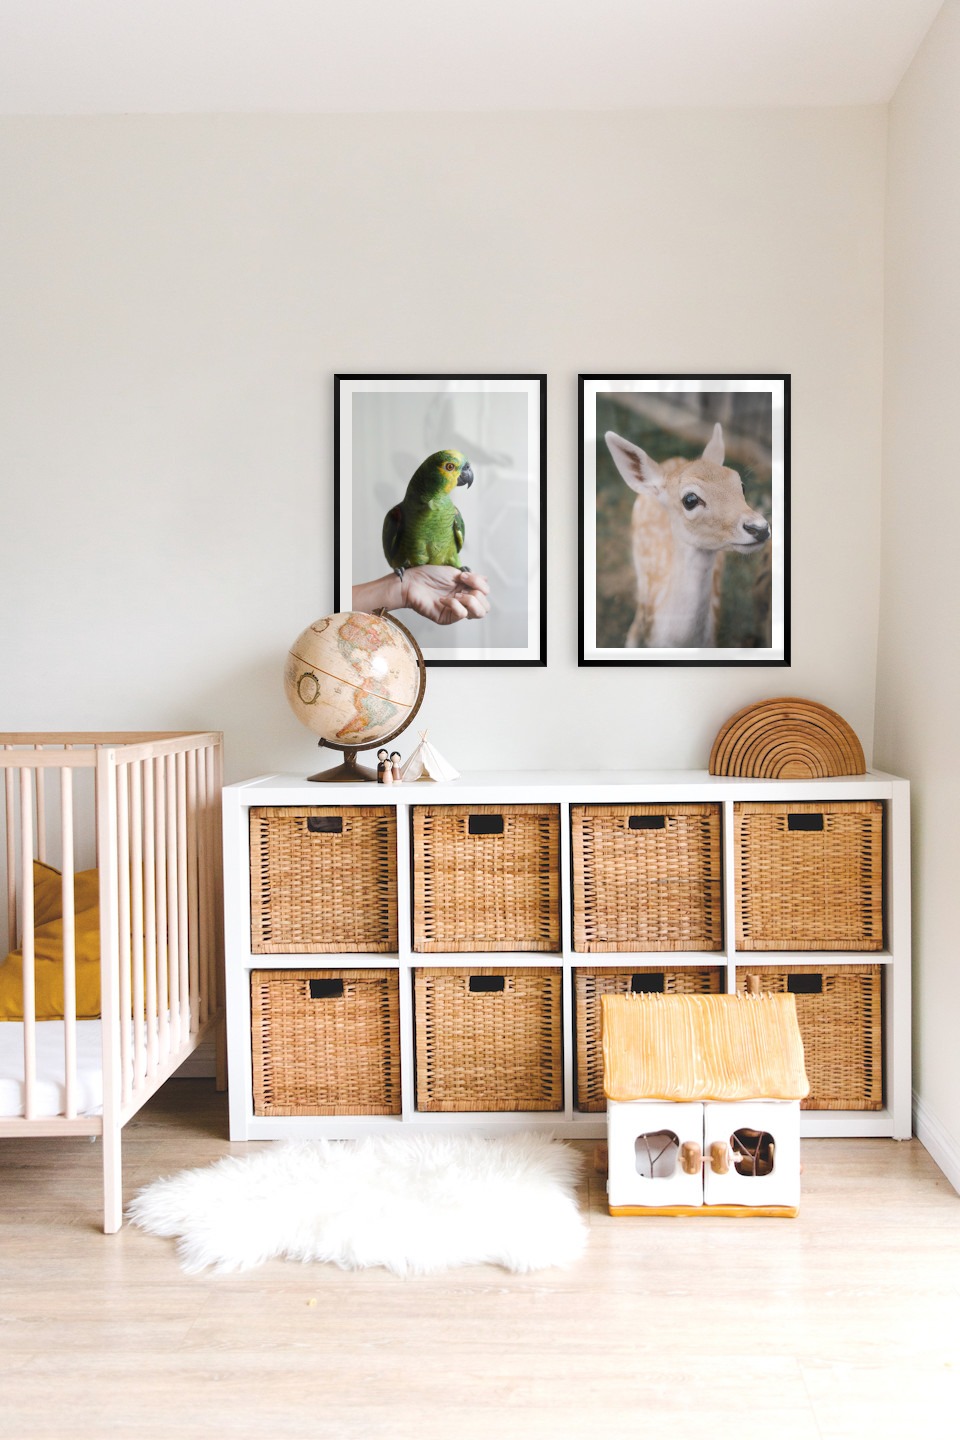 Gallery wall with picture frames in black in sizes 50x70 with prints "Green parrot" and "Deer"